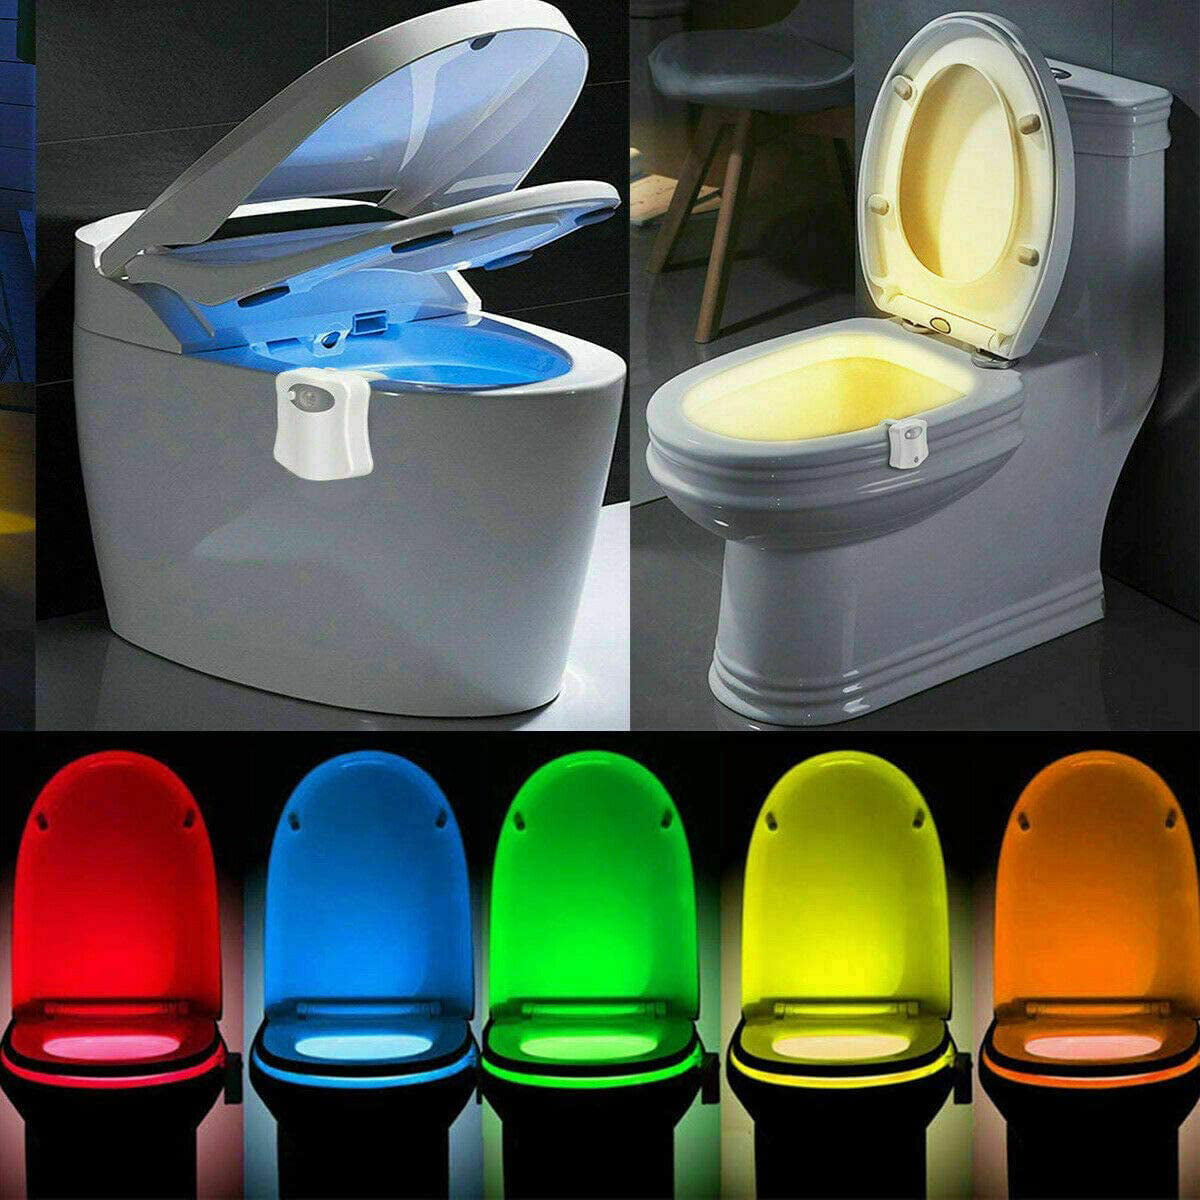 Illumibowl Germ Defense Motion Activated Toilet Night Light Helps Fight Germs! 